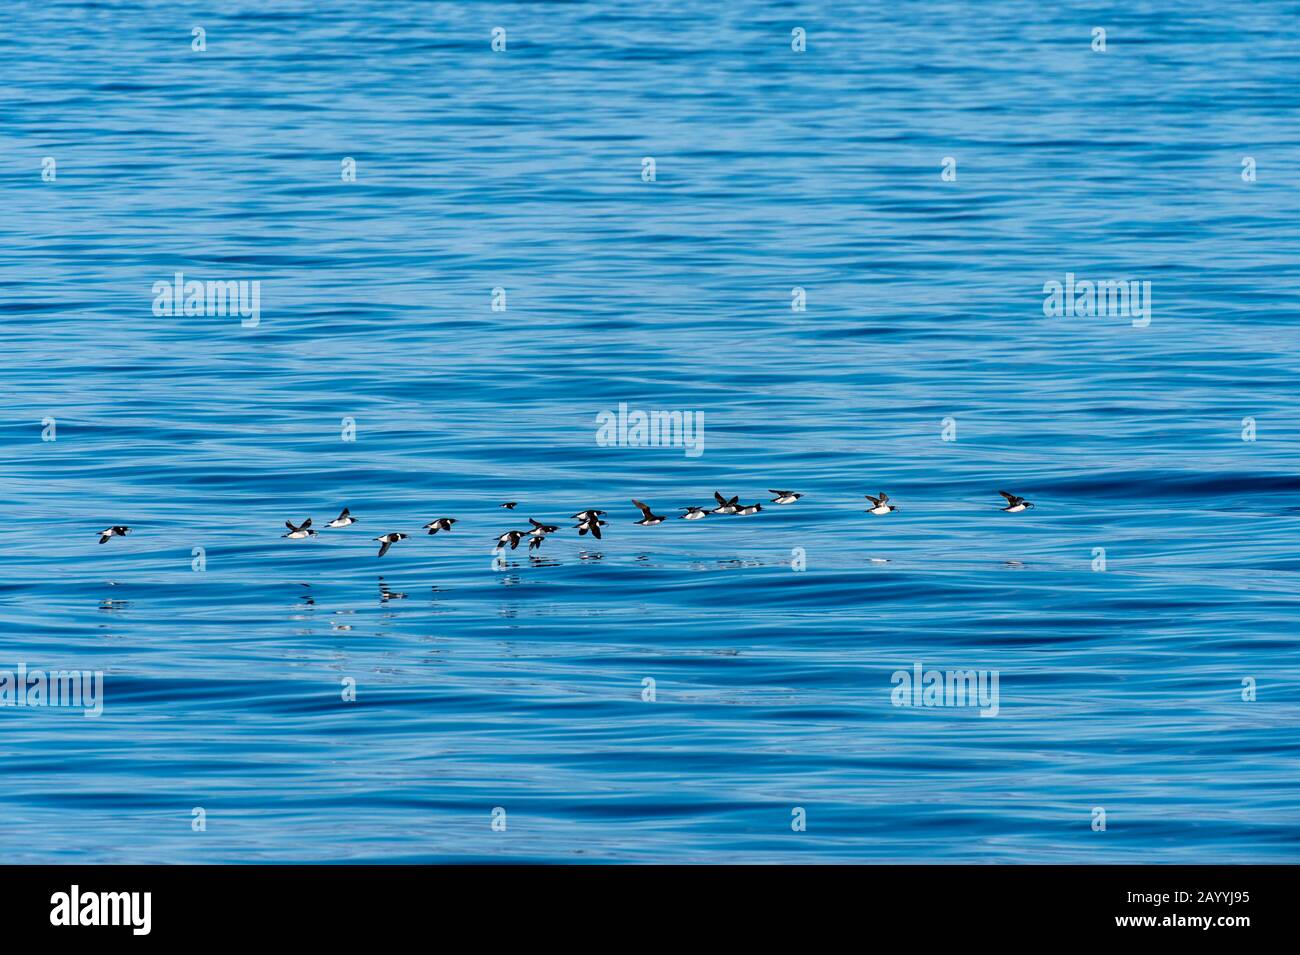 Flocks of Thick-billed murres or Brünnich's guillemot (Uria lomvia) flying over the Arctic Ocean near Bellsund, which is a 20 km long sound on the wes Stock Photo